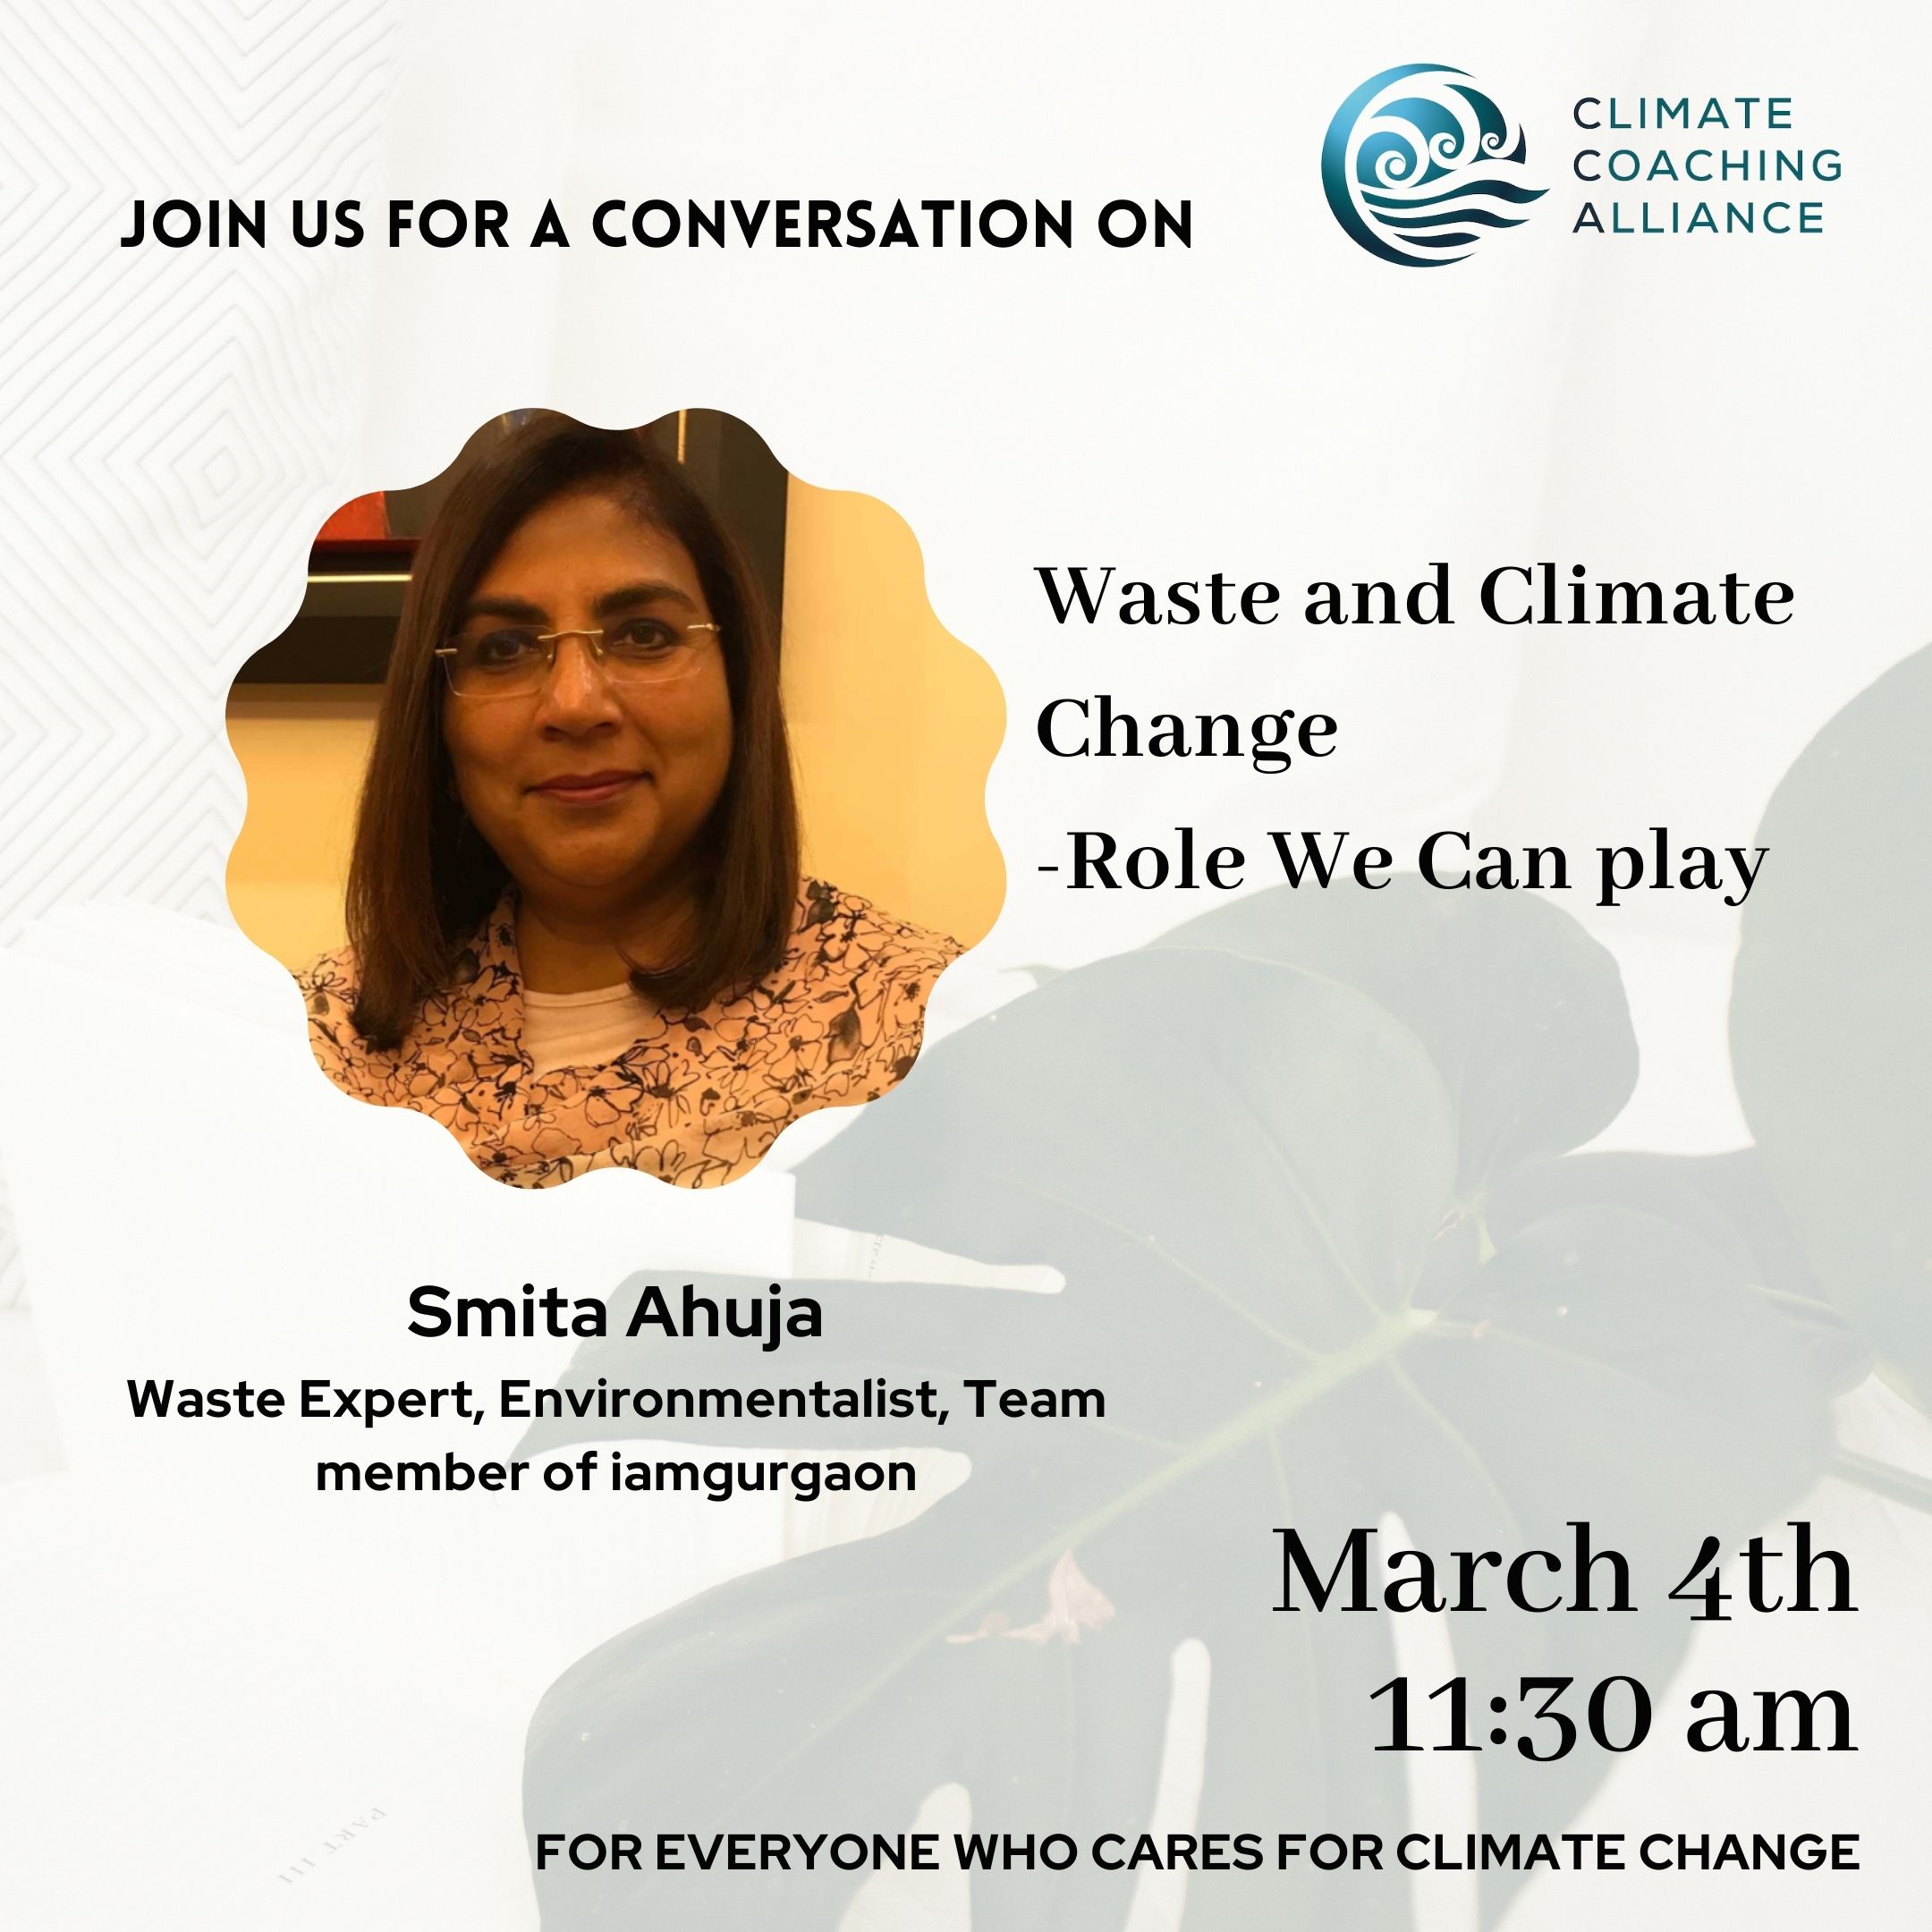 Waste and climate change-Roles we can play